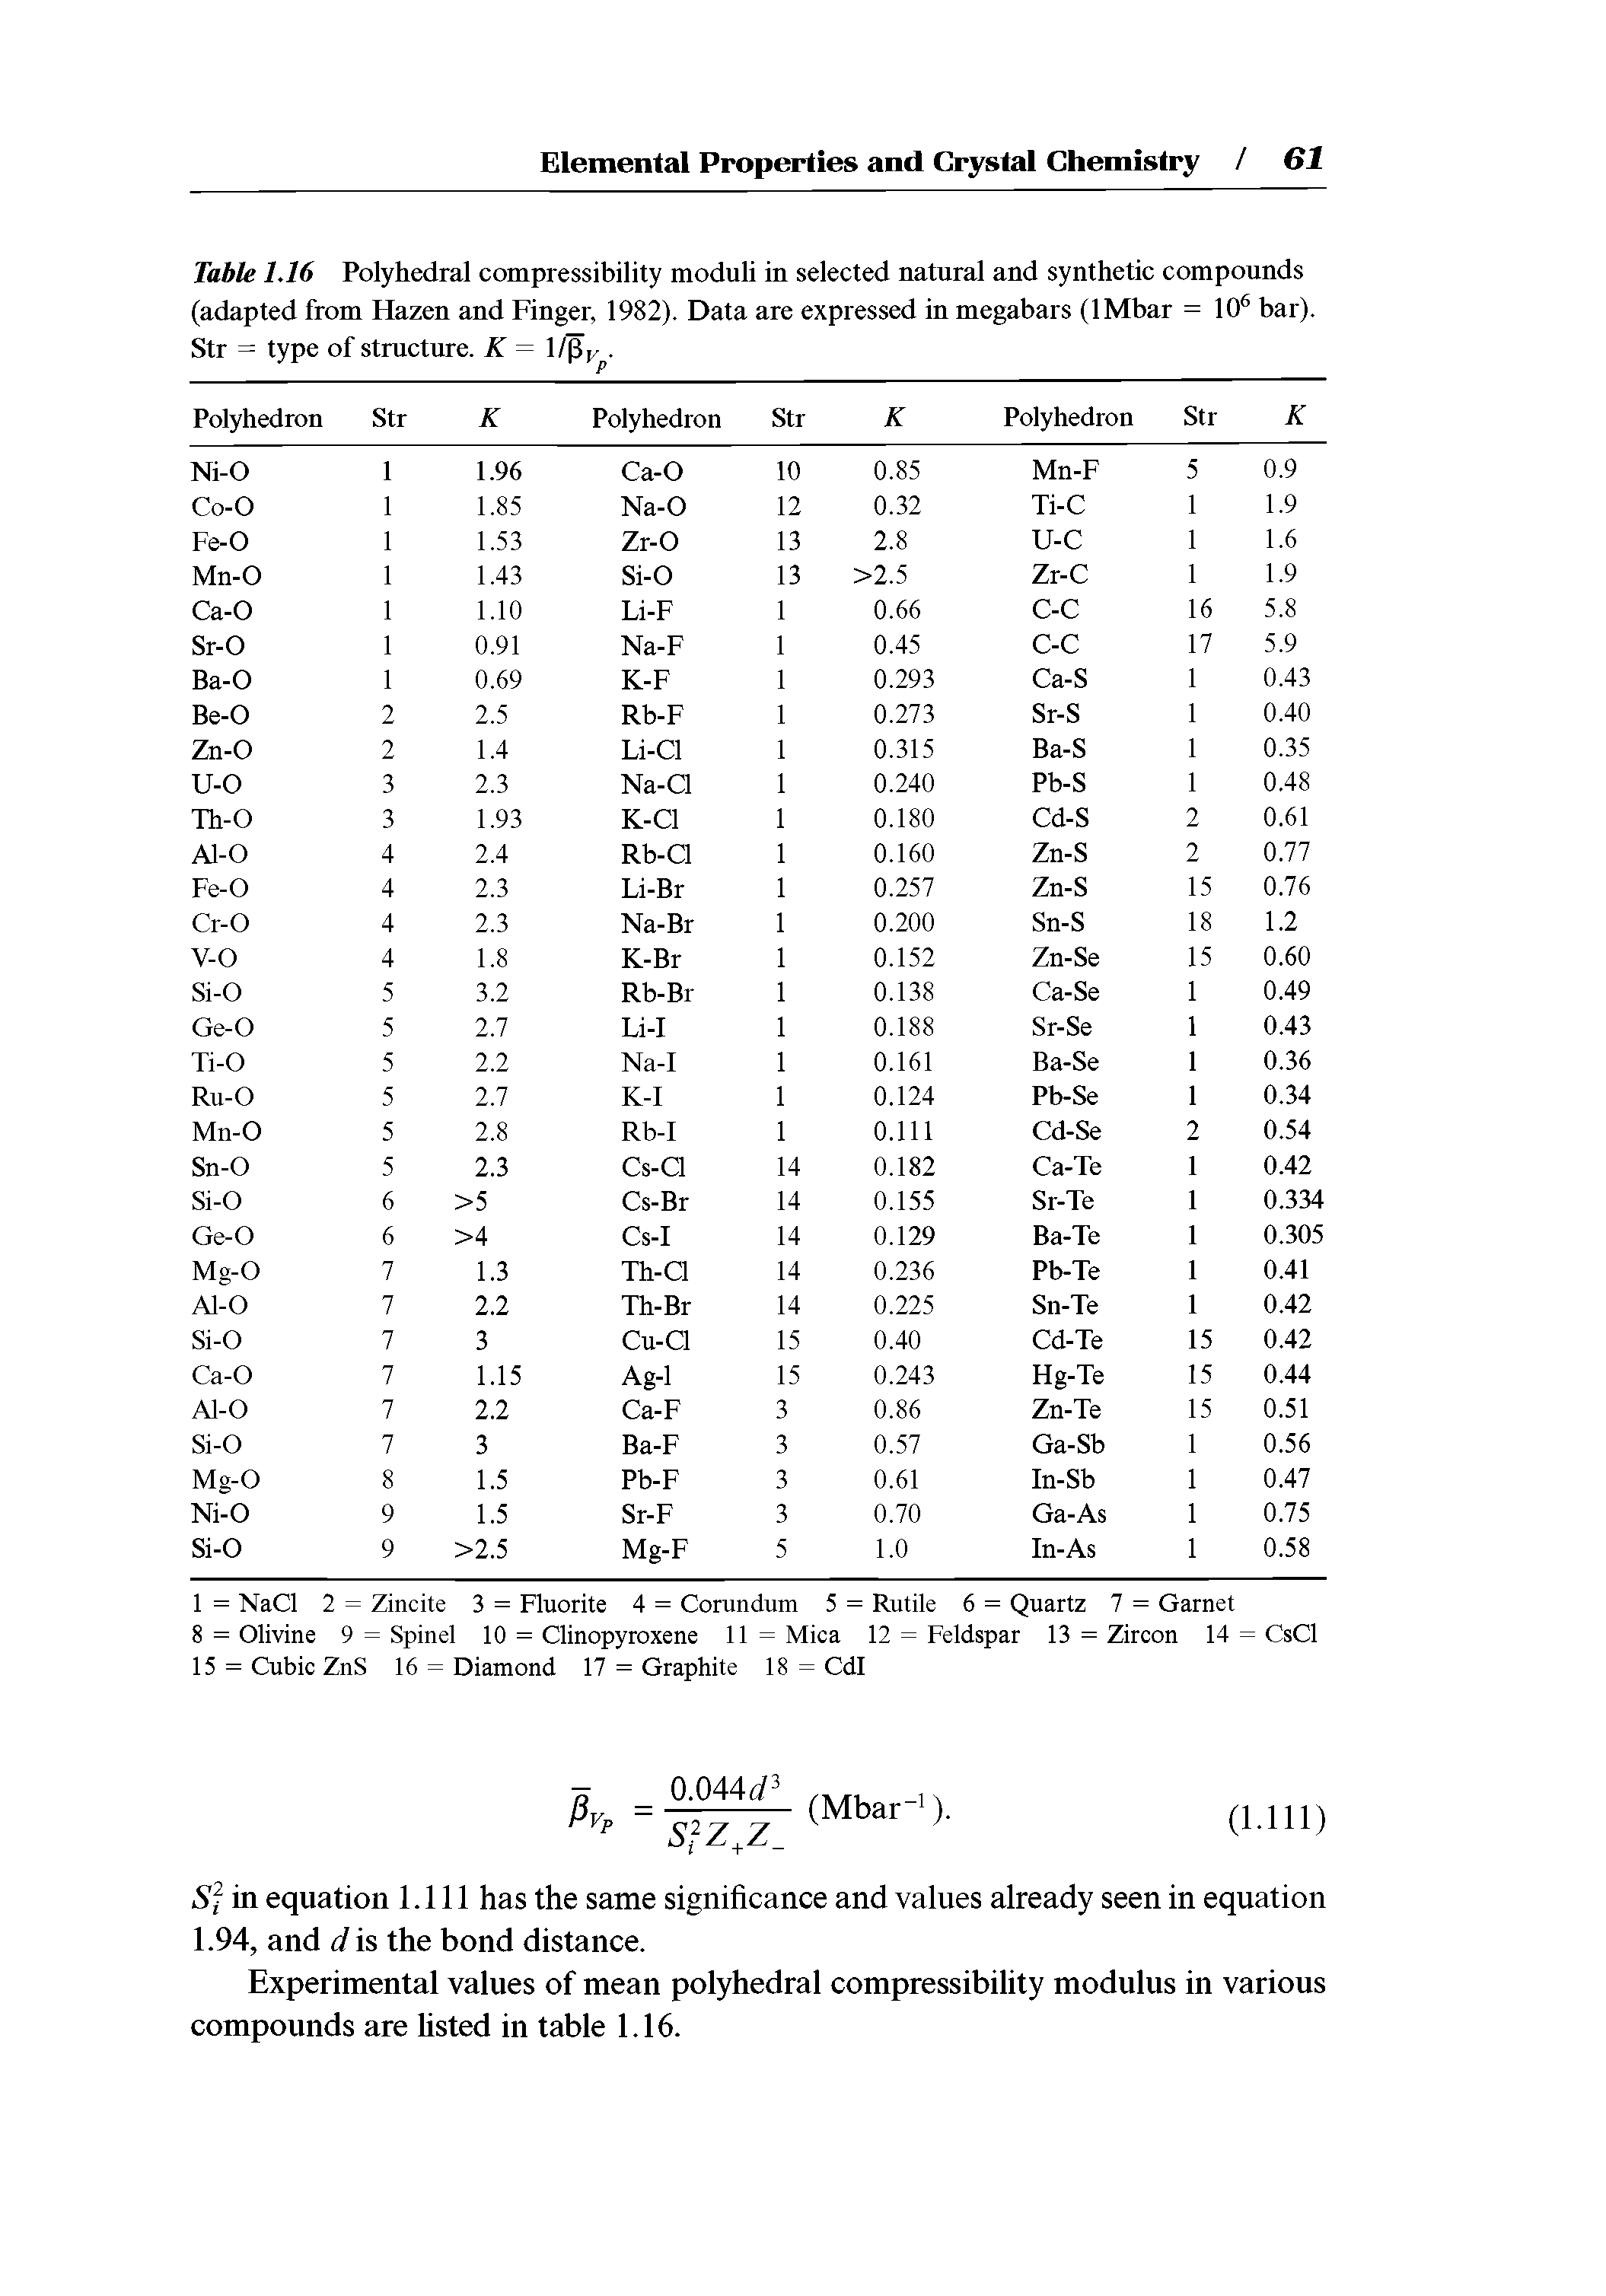 Table 1.16 Polyhedral compressibility moduli in selected natural and synthetic compounds (adapted from Hazen and Finger, 1982). Data are expressed in megabars (IMbar = 10 bar). Str = type of structure. K = 1/Pr-. ...